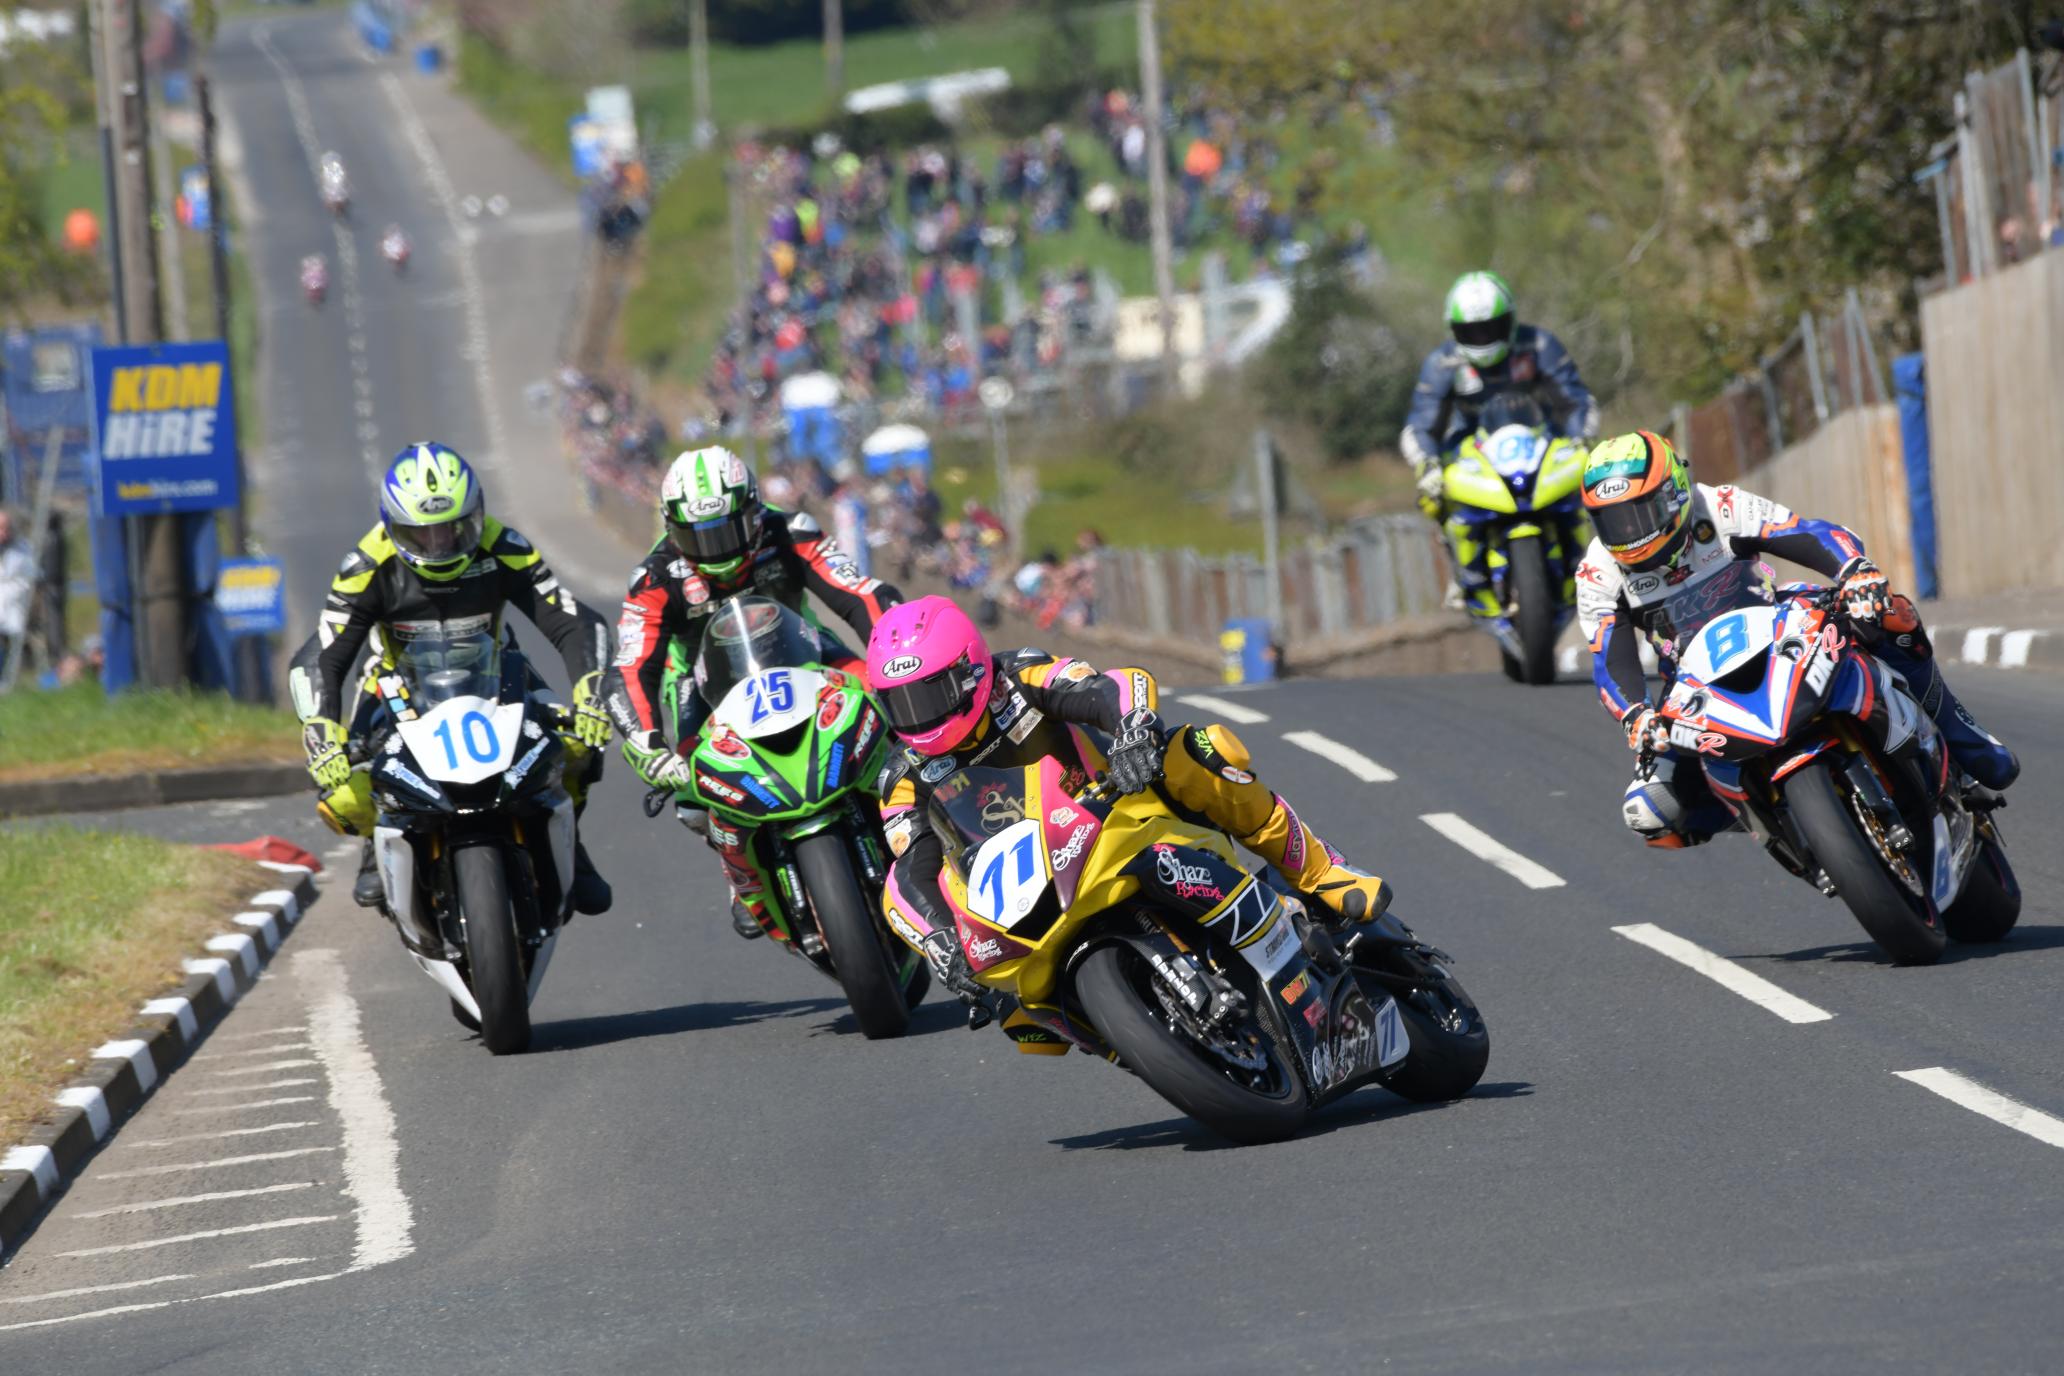 Insurance hike will not put brakes on Cookstown road race